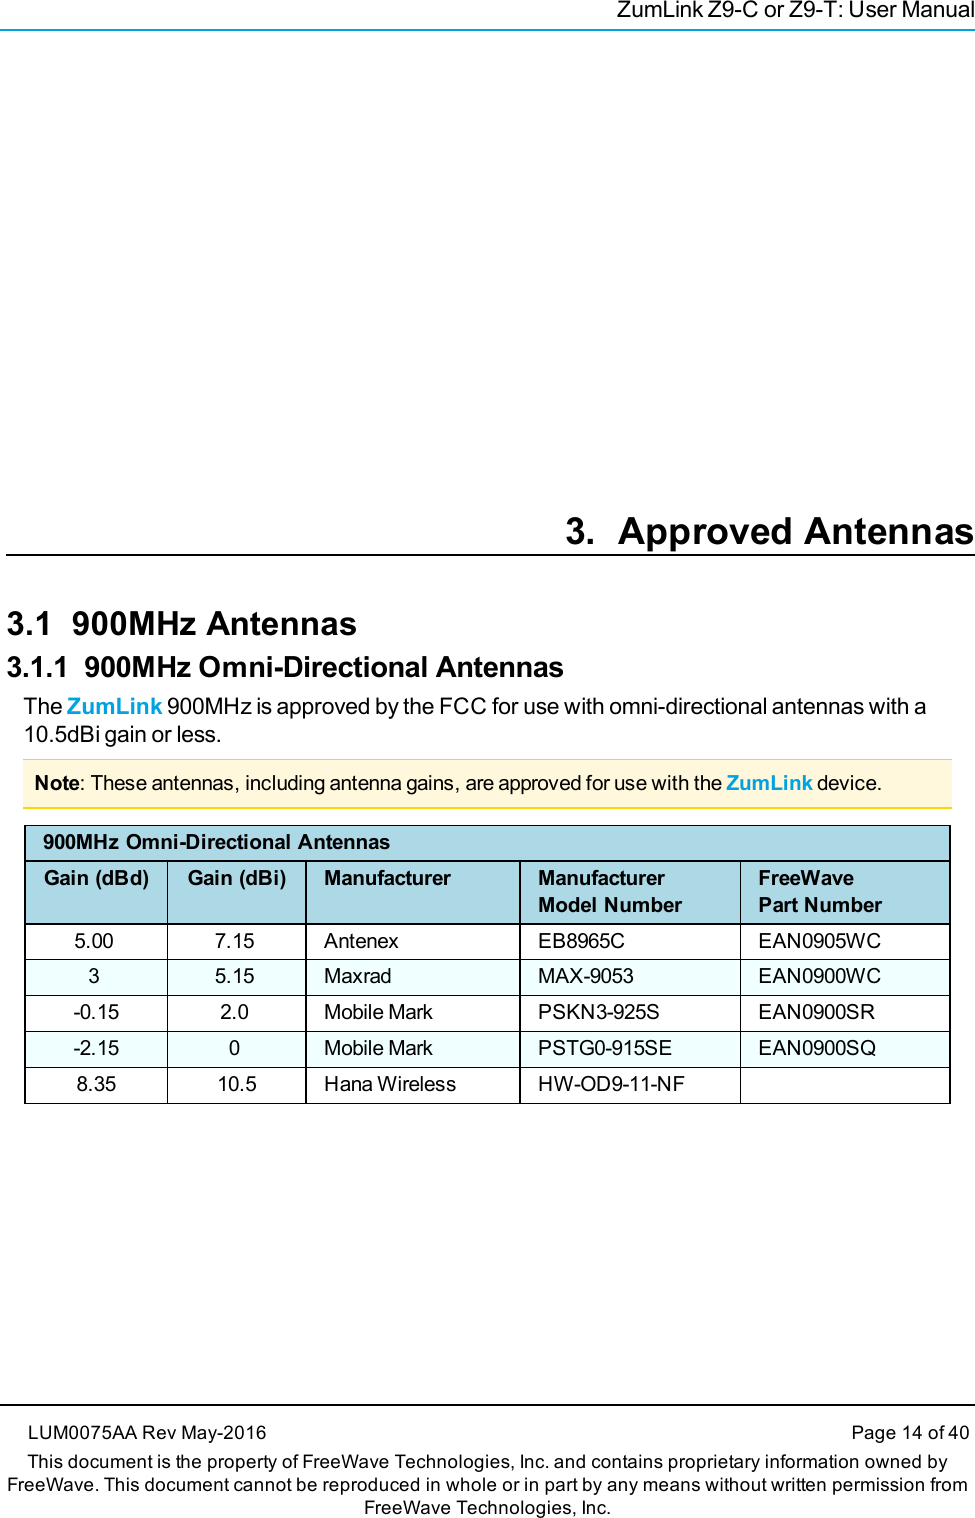 ZumLink Z9-C or Z9-T: User Manual3. Approved Antennas3.1 900MHz Antennas3.1.1 900MHz Omni-Directional AntennasThe ZumLink 900MHz is approved by the FCC for use with omni-directional antennas with a10.5dBi gain or less.Note: These antennas, including antenna gains, are approved for use with the ZumLink device.900MHz Omni-Directional AntennasGain (dBd) Gain (dBi) Manufacturer ManufacturerModel NumberFreeWavePart Number5.00 7.15 Antenex EB8965C EAN0905WC3 5.15 Maxrad MAX-9053 EAN0900WC-0.15 2.0 Mobile Mark PSKN3-925S EAN0900SR-2.15 0 Mobile Mark PSTG0-915SE EAN0900SQ8.35 10.5 Hana Wireless HW-OD9-11-NFLUM0075AA Rev May-2016 Page 14 of 40This document is the property of FreeWave Technologies, Inc. and contains proprietary information owned byFreeWave. This document cannot be reproduced in whole or in part by any means without written permission fromFreeWave Technologies, Inc.